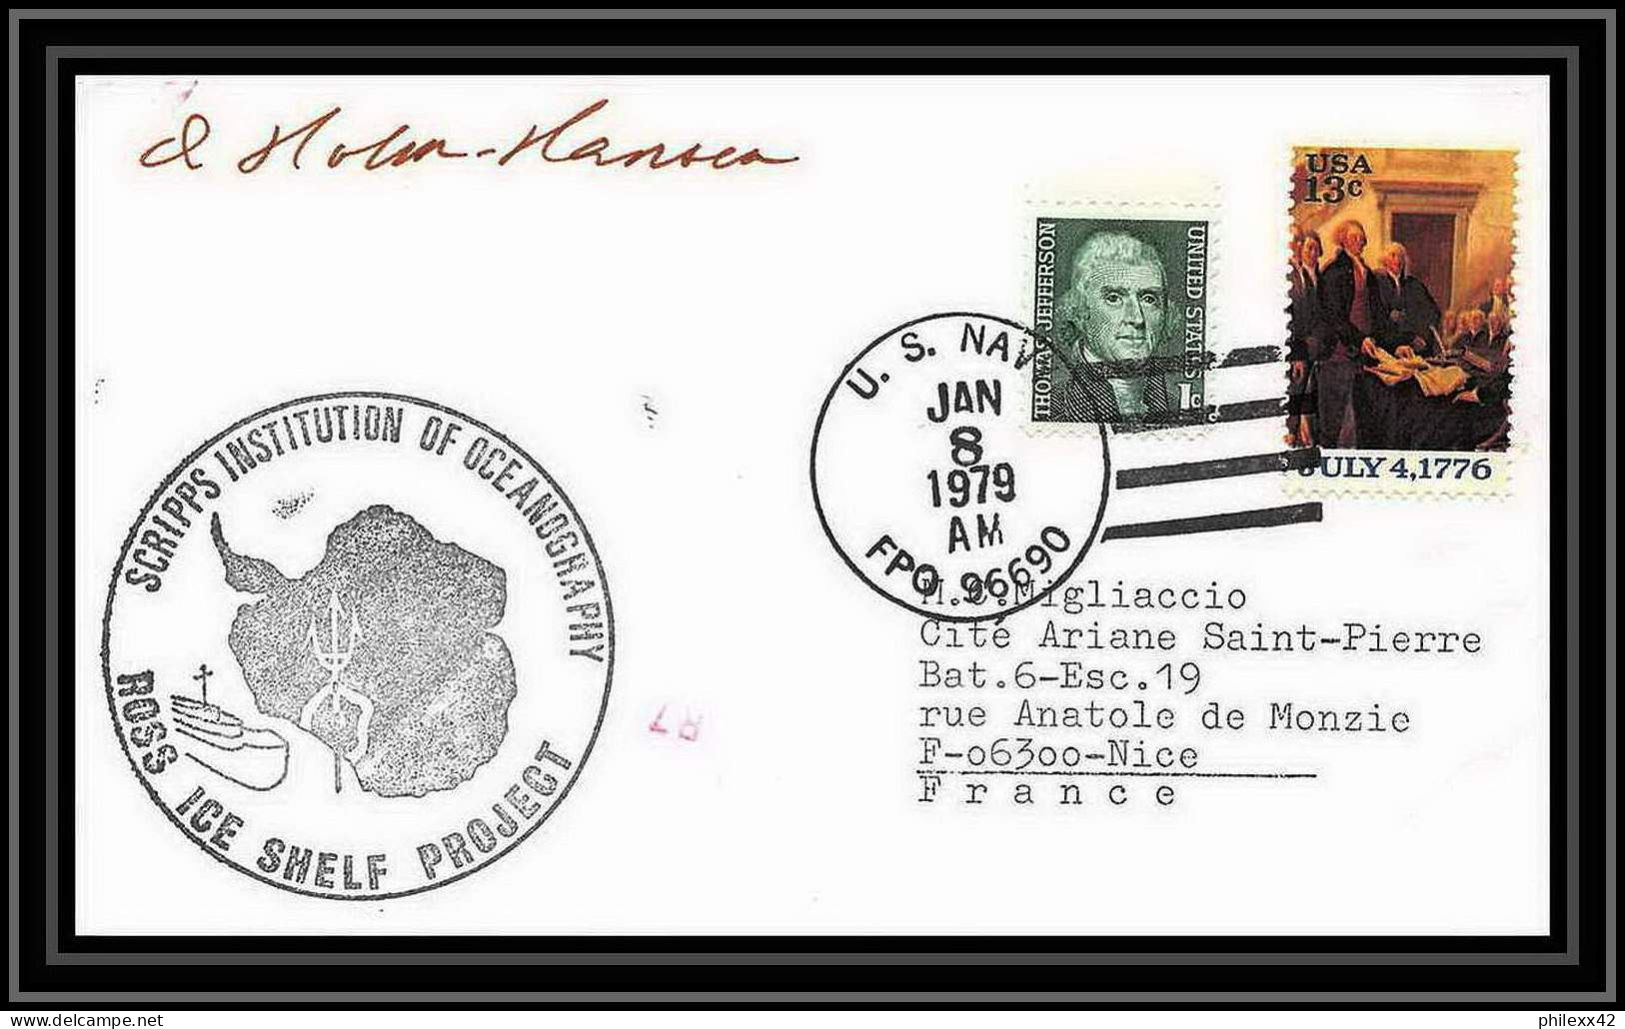 1976 Antarctic USA Lettre (cover) Ross Ice Shelf Project 8/1/1979 Signé Signed - Wetenschappelijke Stations & Arctic Drifting Stations